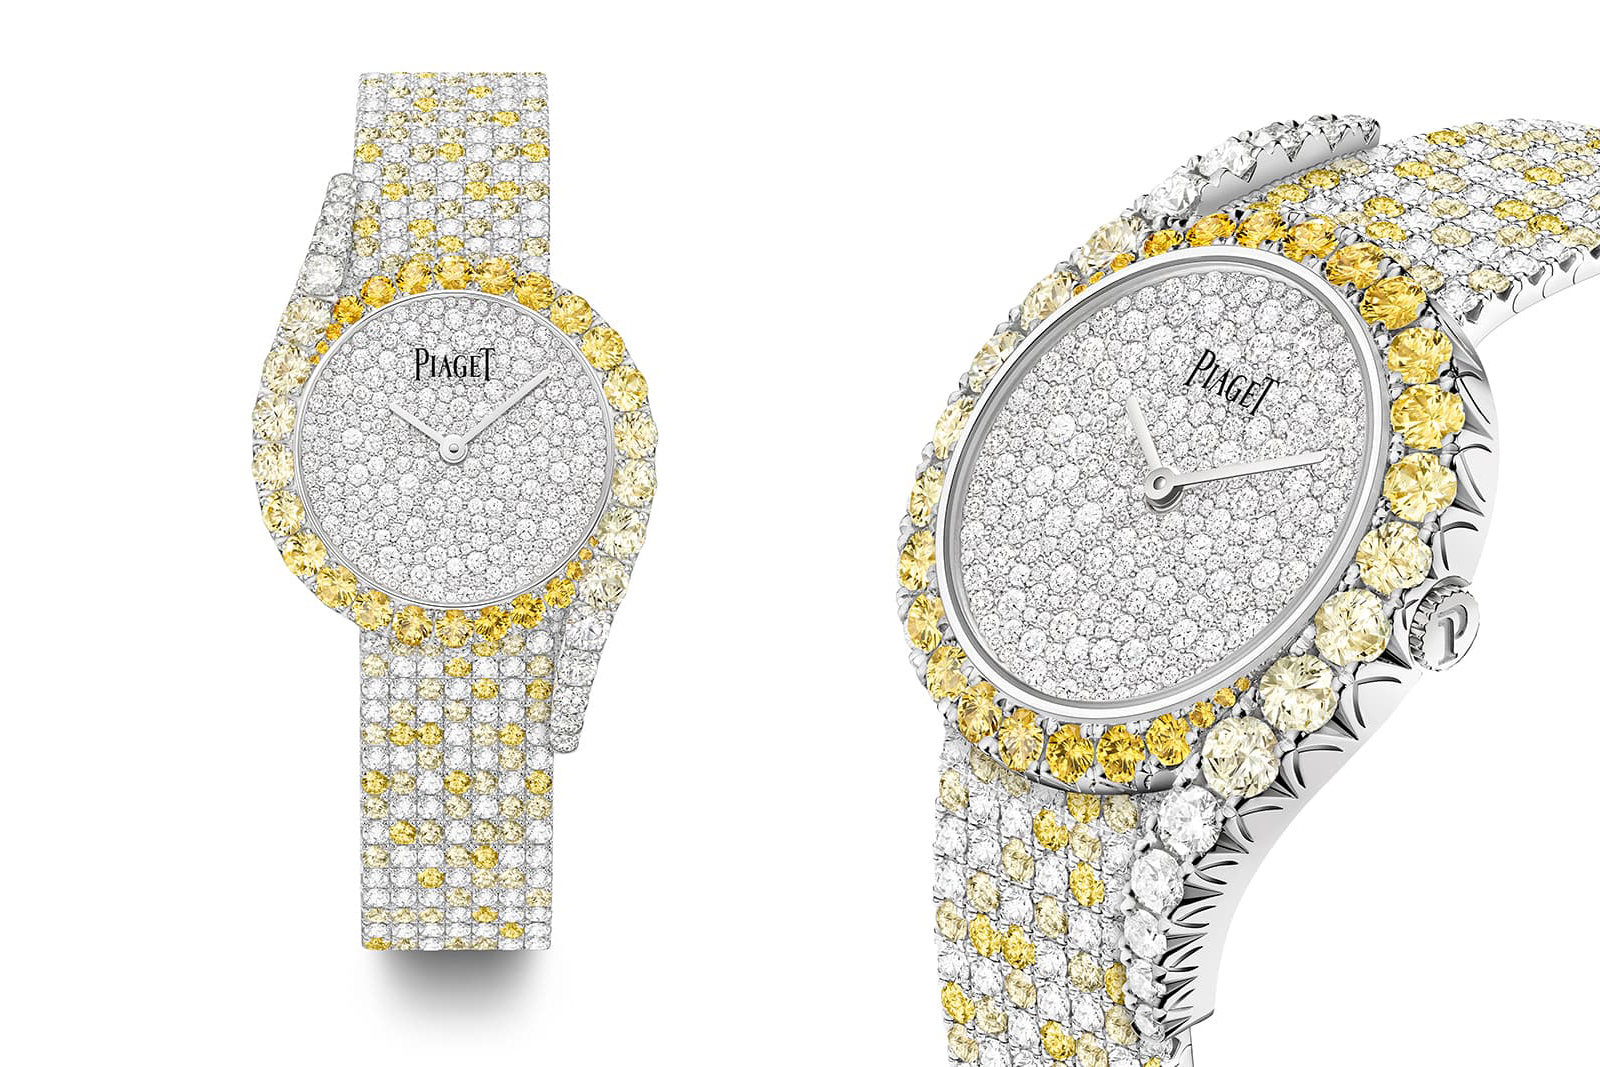 Piaget Limelight Gala Precious Zenith watch with 32 brilliant-cut yellow sapphires and 10 brilliant-cut diamonds on the bezel, 289 diamonds on the dial, and 124 yellow sapphires and 276 diamonds on the bracelet 